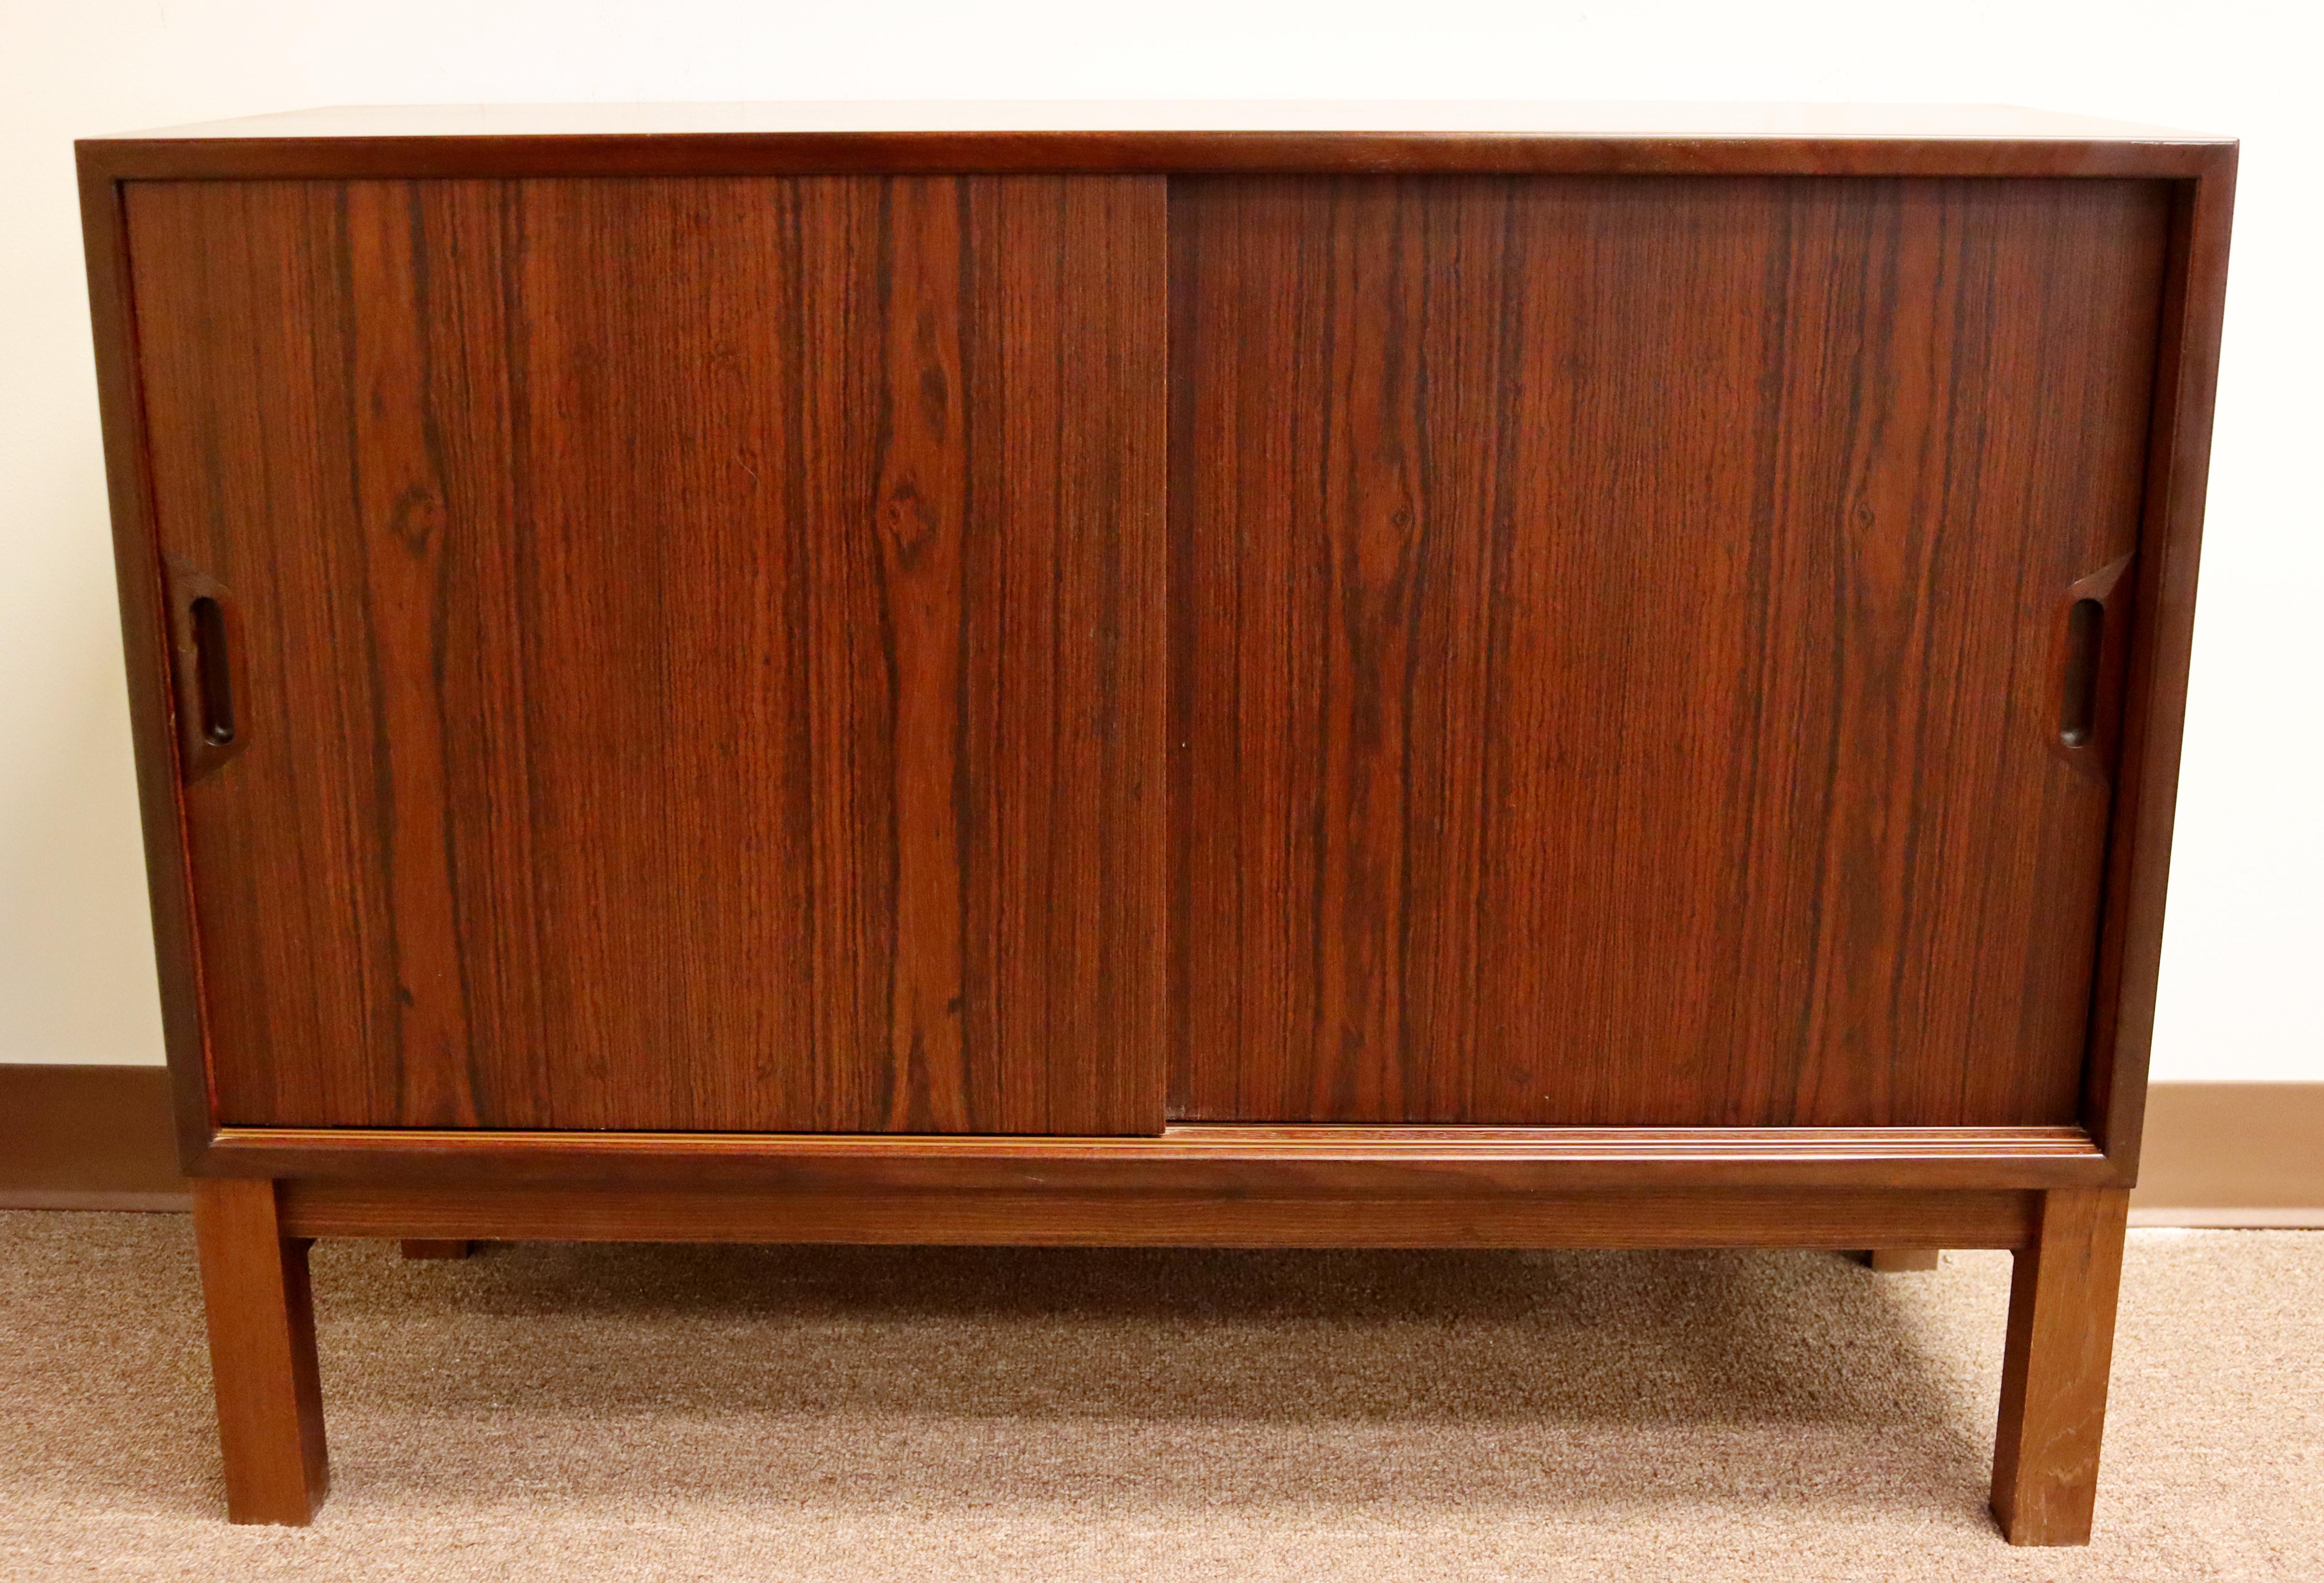 For your consideration is a fantastic, short credenza or cabinet, made of rosewood and with sliding doors, made in Denmark, circa the 1960s. In excellent vintage condition. The dimensions are 39.5